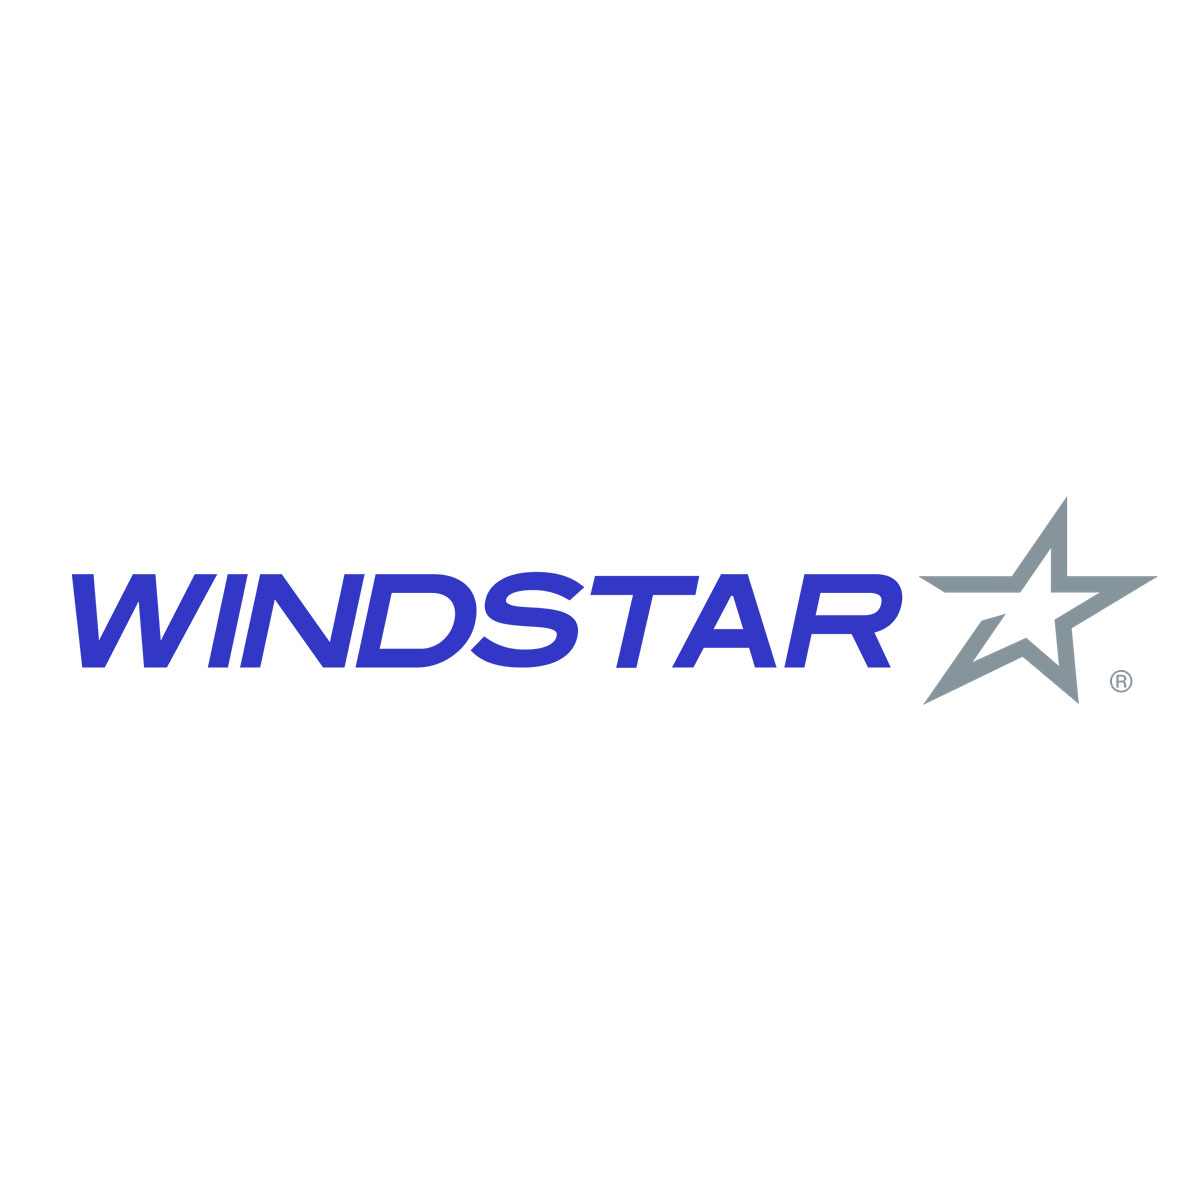 Windstar to Locate at WestStar Tower